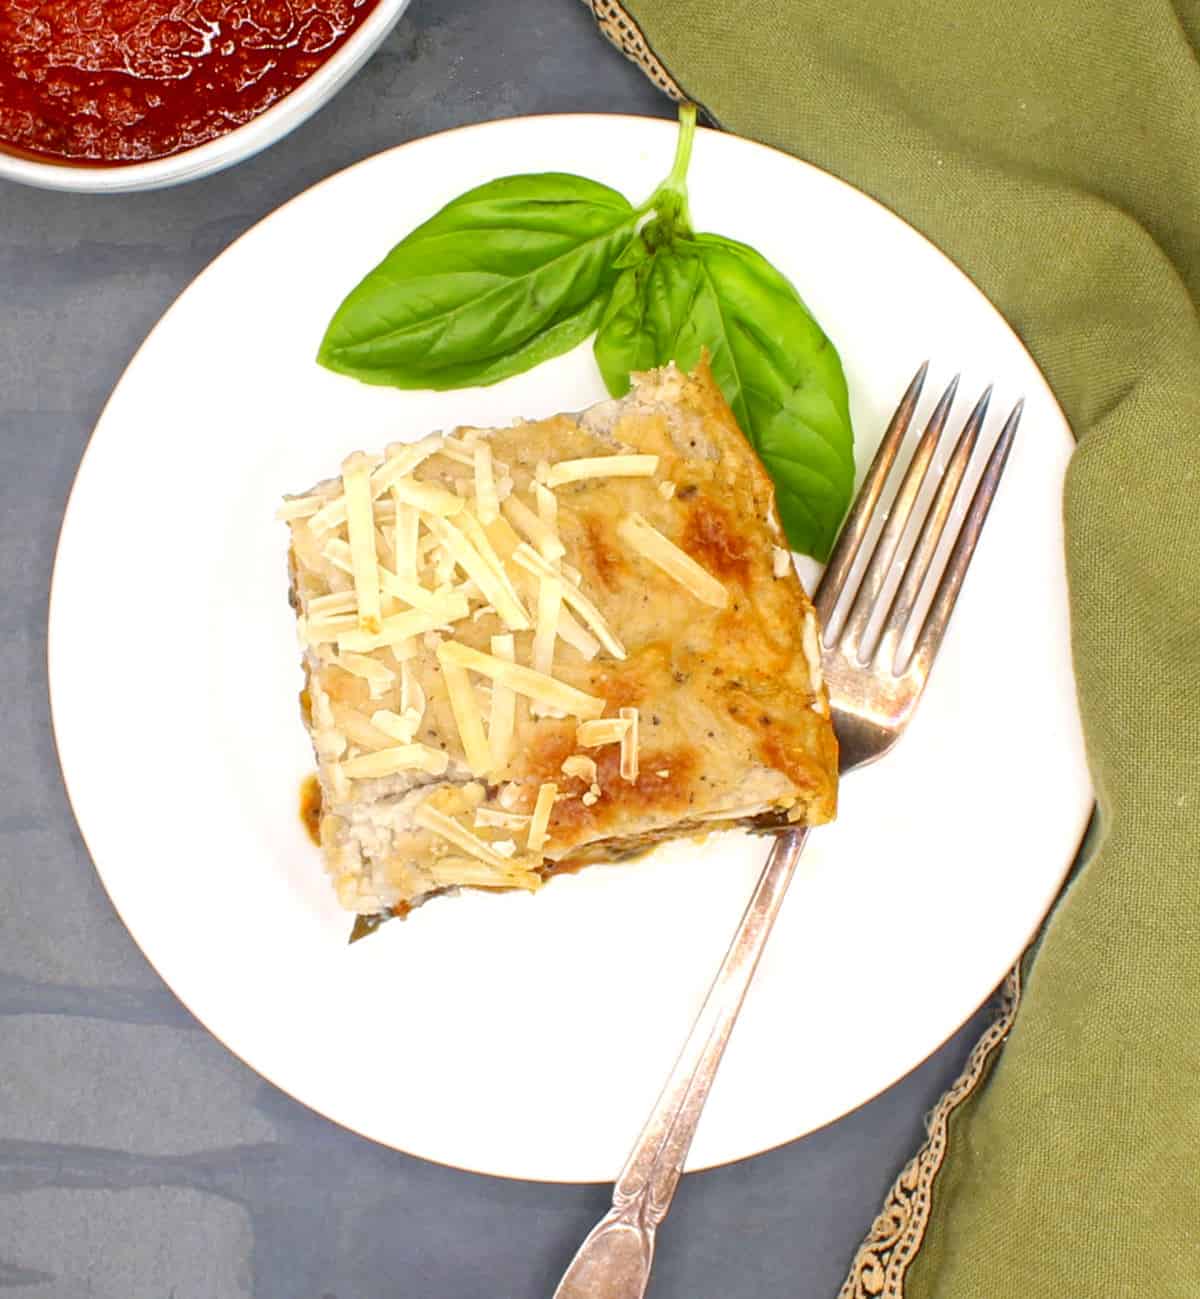 Slice of vegan moussaka with basil leaves in white plate with fork. Tomato sauce in background.